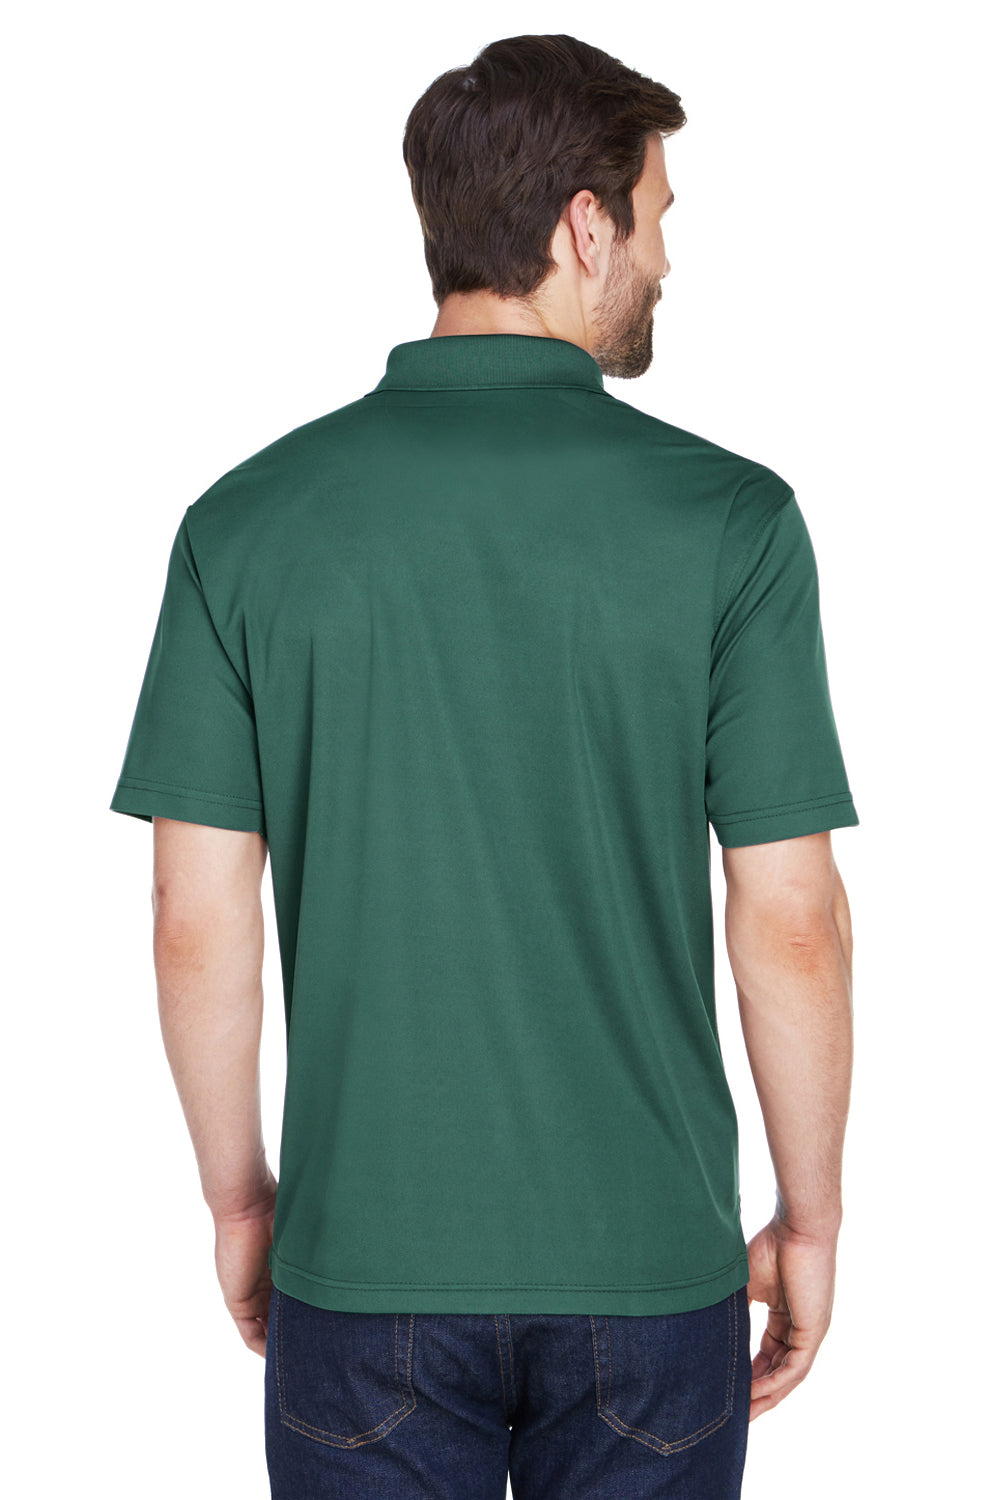 UltraClub 8210 Mens Cool & Dry Moisture Wicking Short Sleeve Polo Shirt Forest Green Back